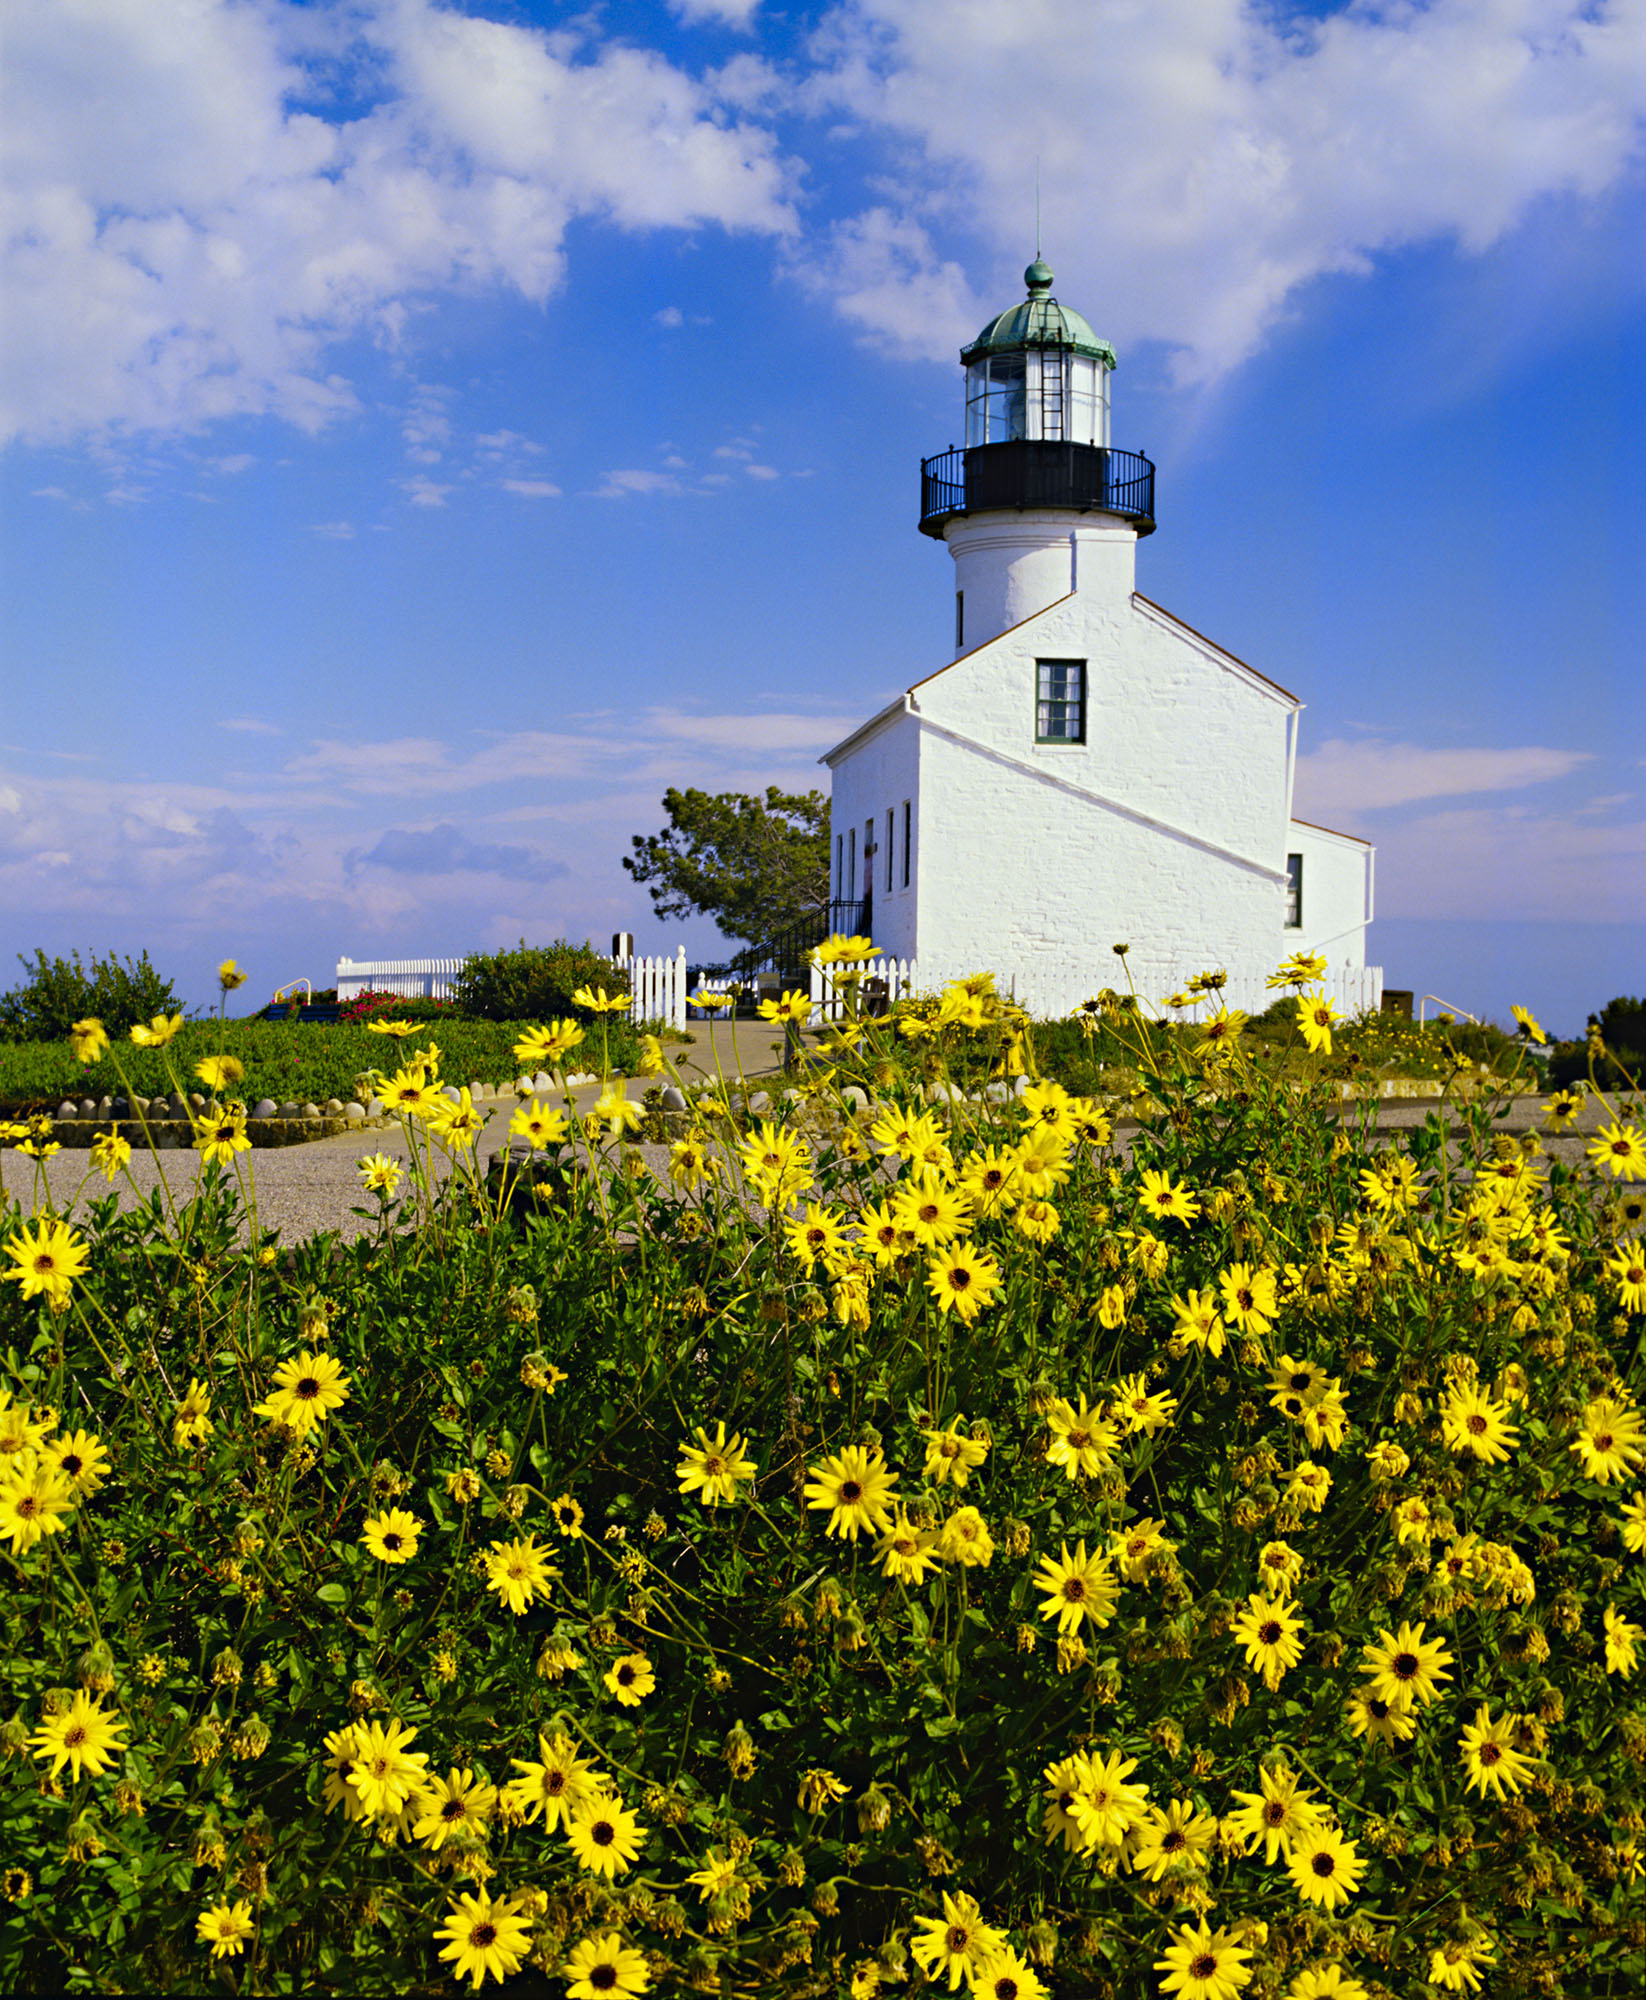 Find Your Park/Encuentra Tu Parque at Cabrillo National Monument near San Diego, California